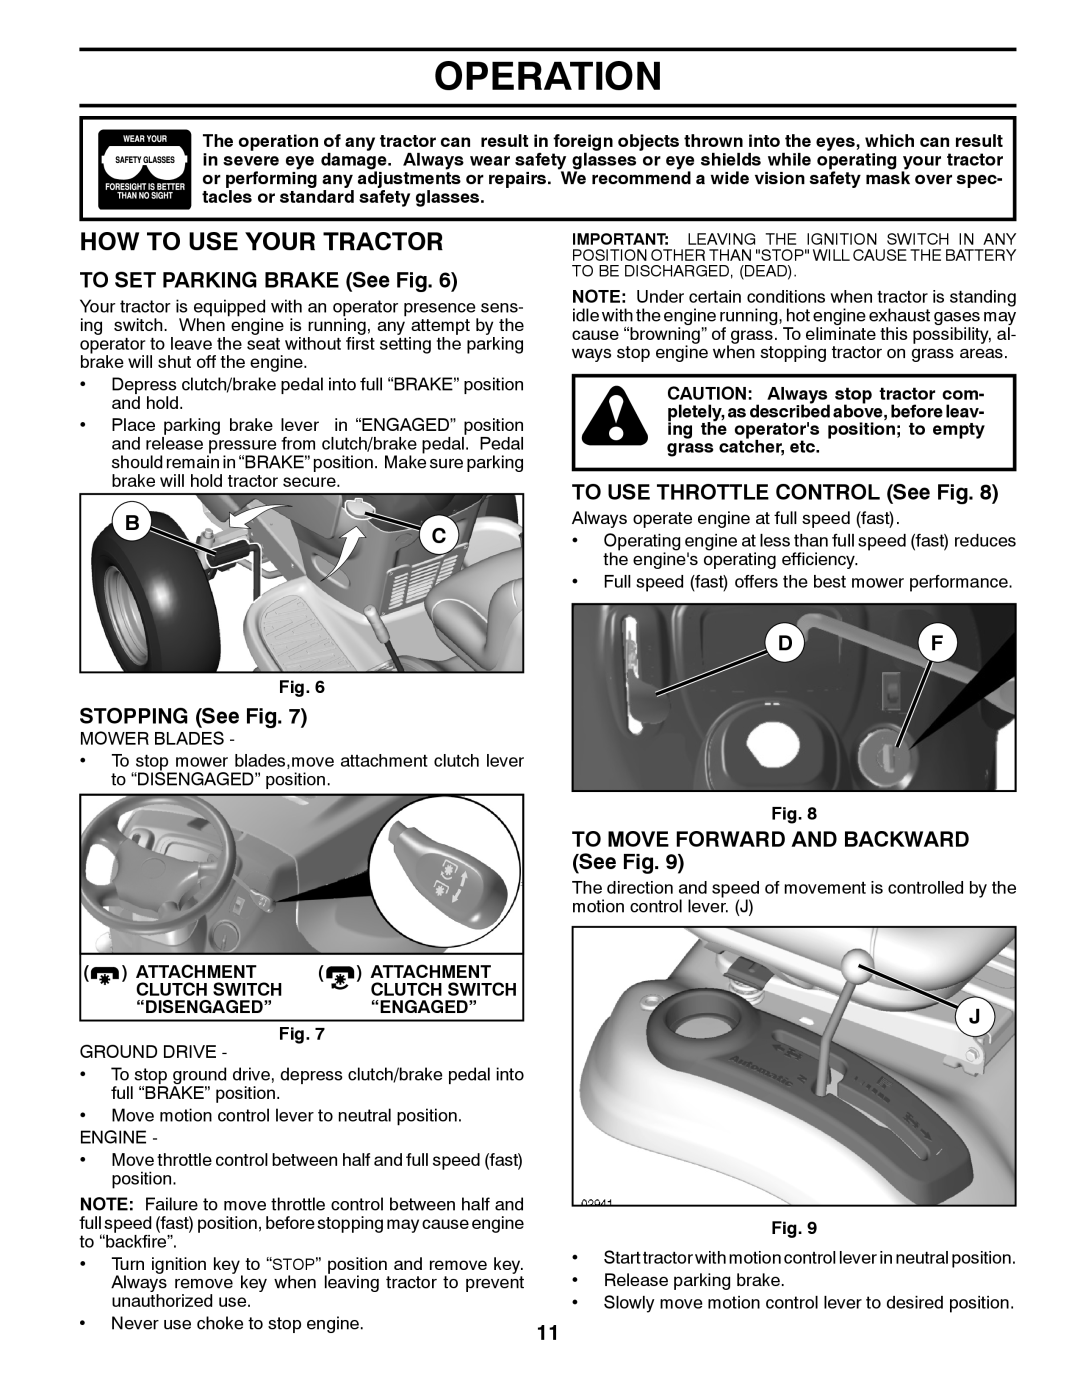 Poulan XT195H42LT manual How To Use Your Tractor, Operation, TO SET PARKING BRAKE See Fig, STOPPING See Fig, Attachment 